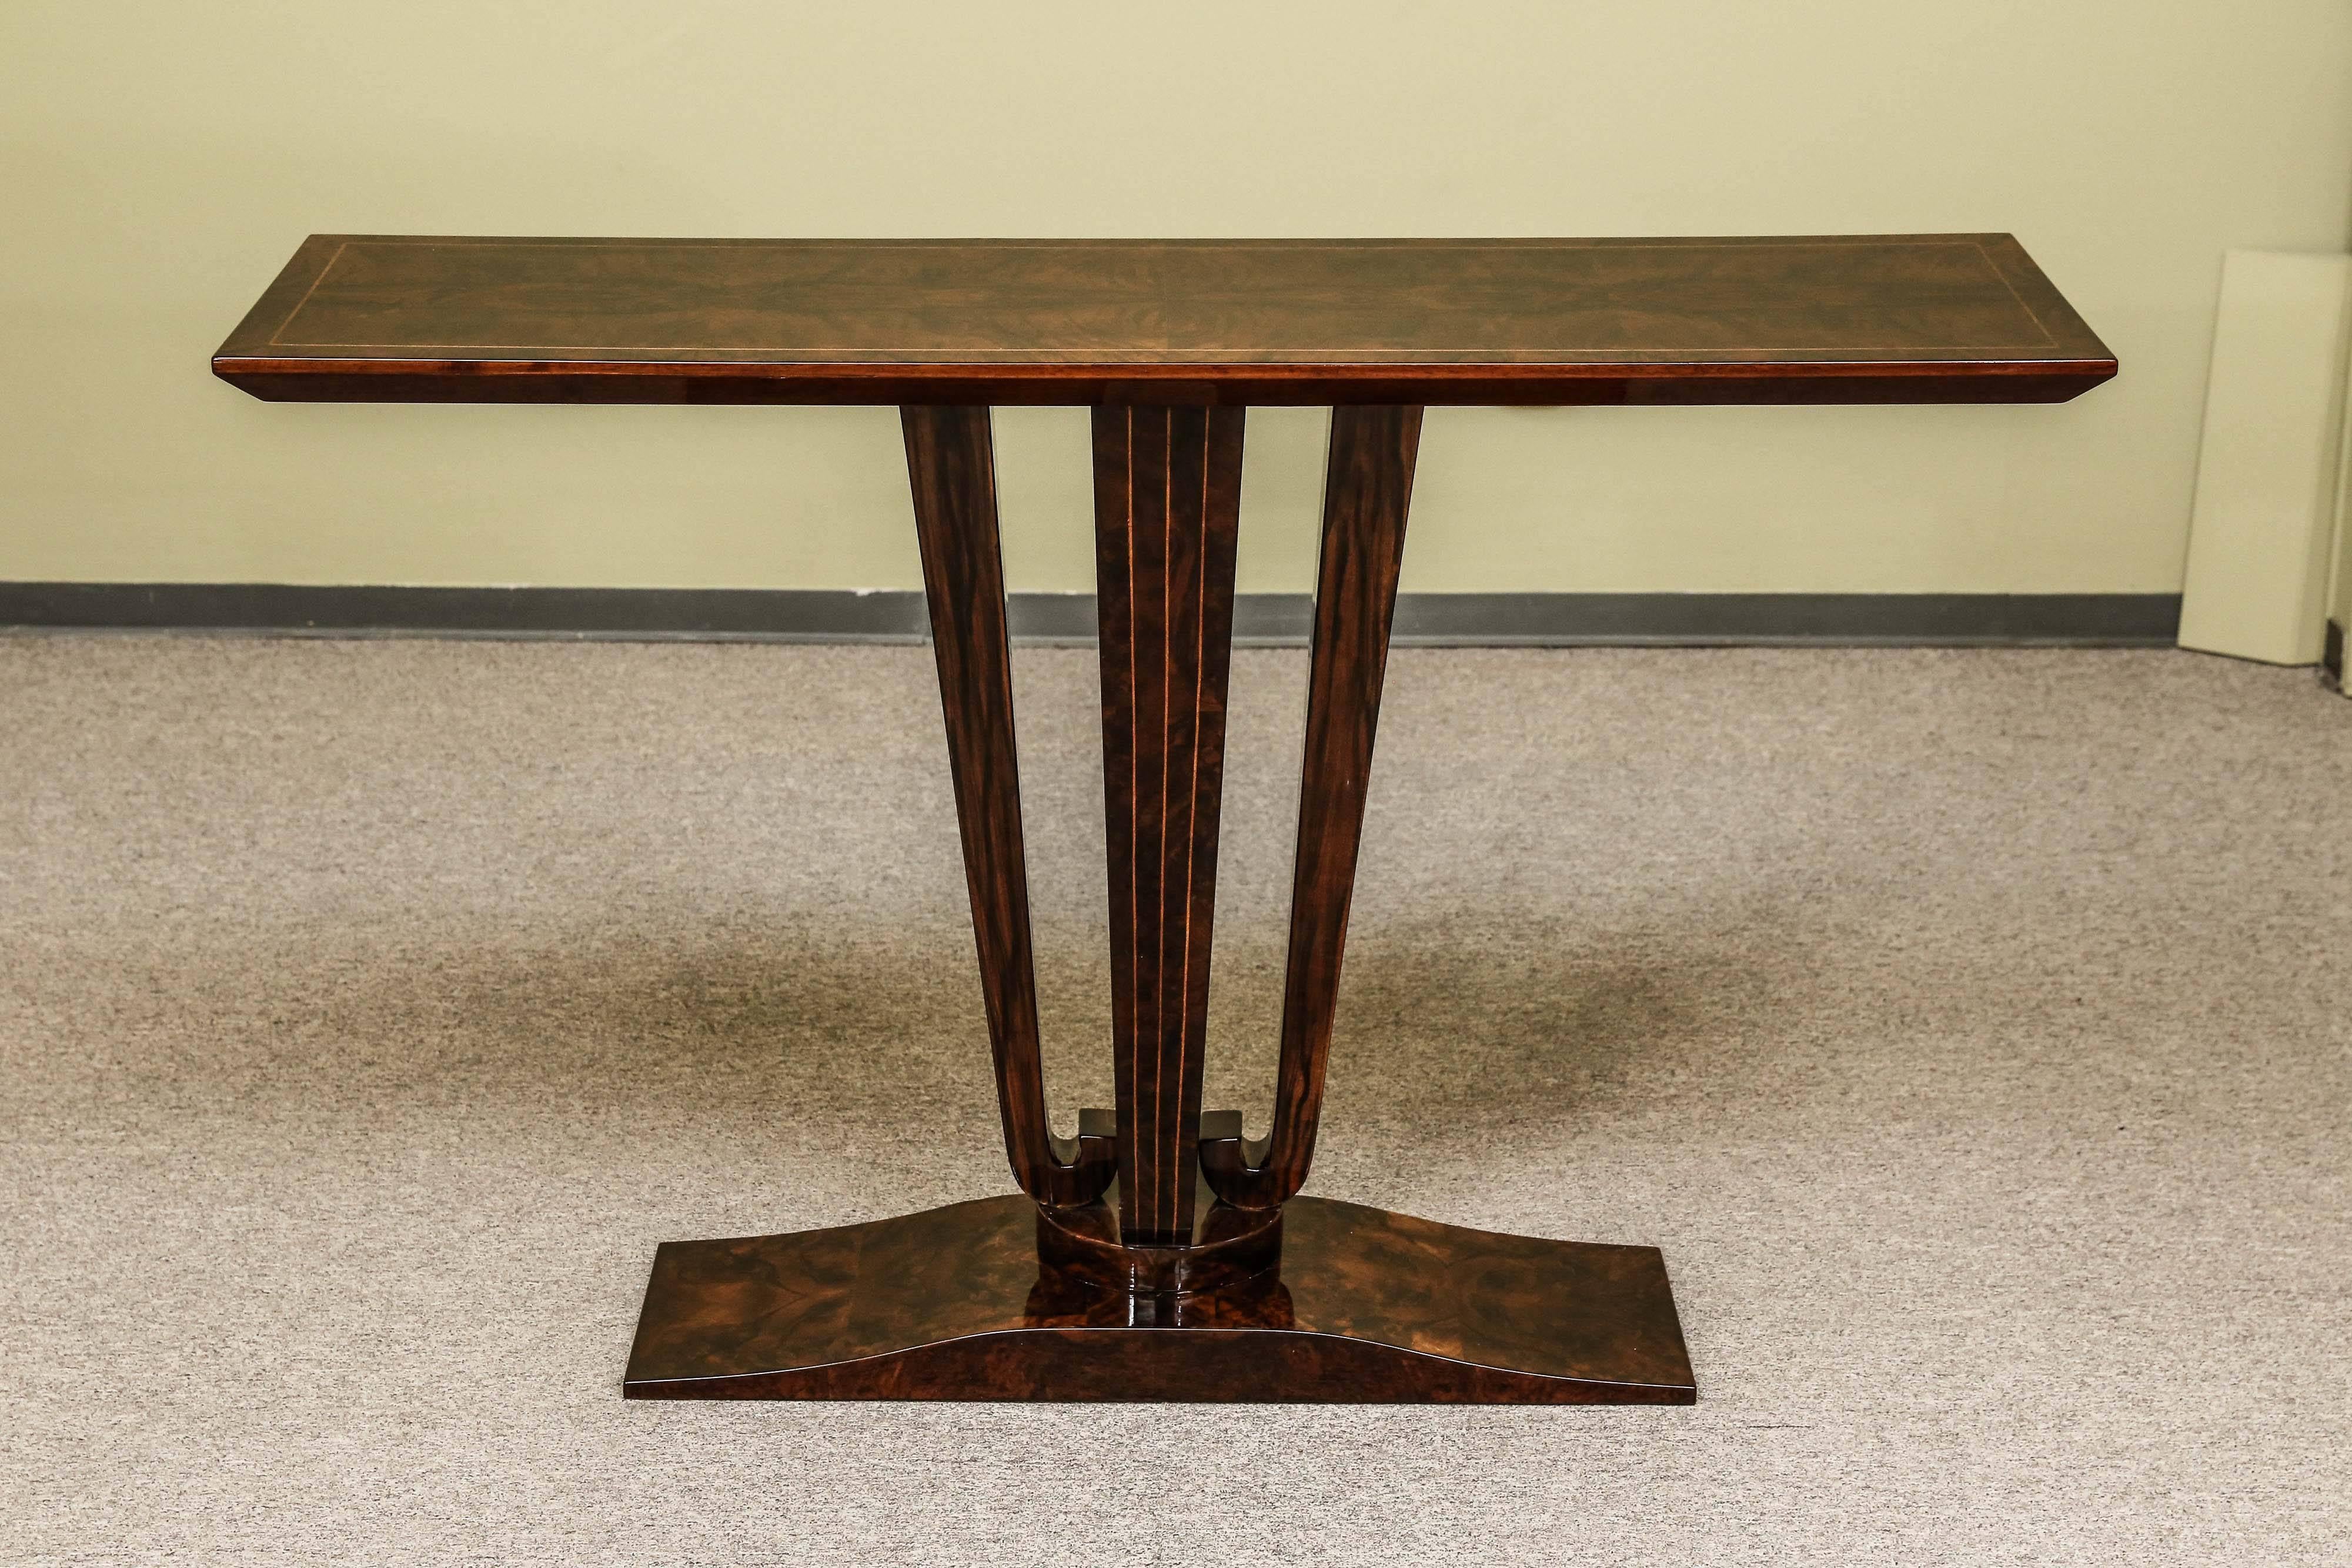 Rectangular top is elevated by the three legs, that are curved on the bottom and are connected to the trapezoidal base. Top of the table has inlaid trimming that is emphasizing corners of the console. Each one of the legs has three streaming down